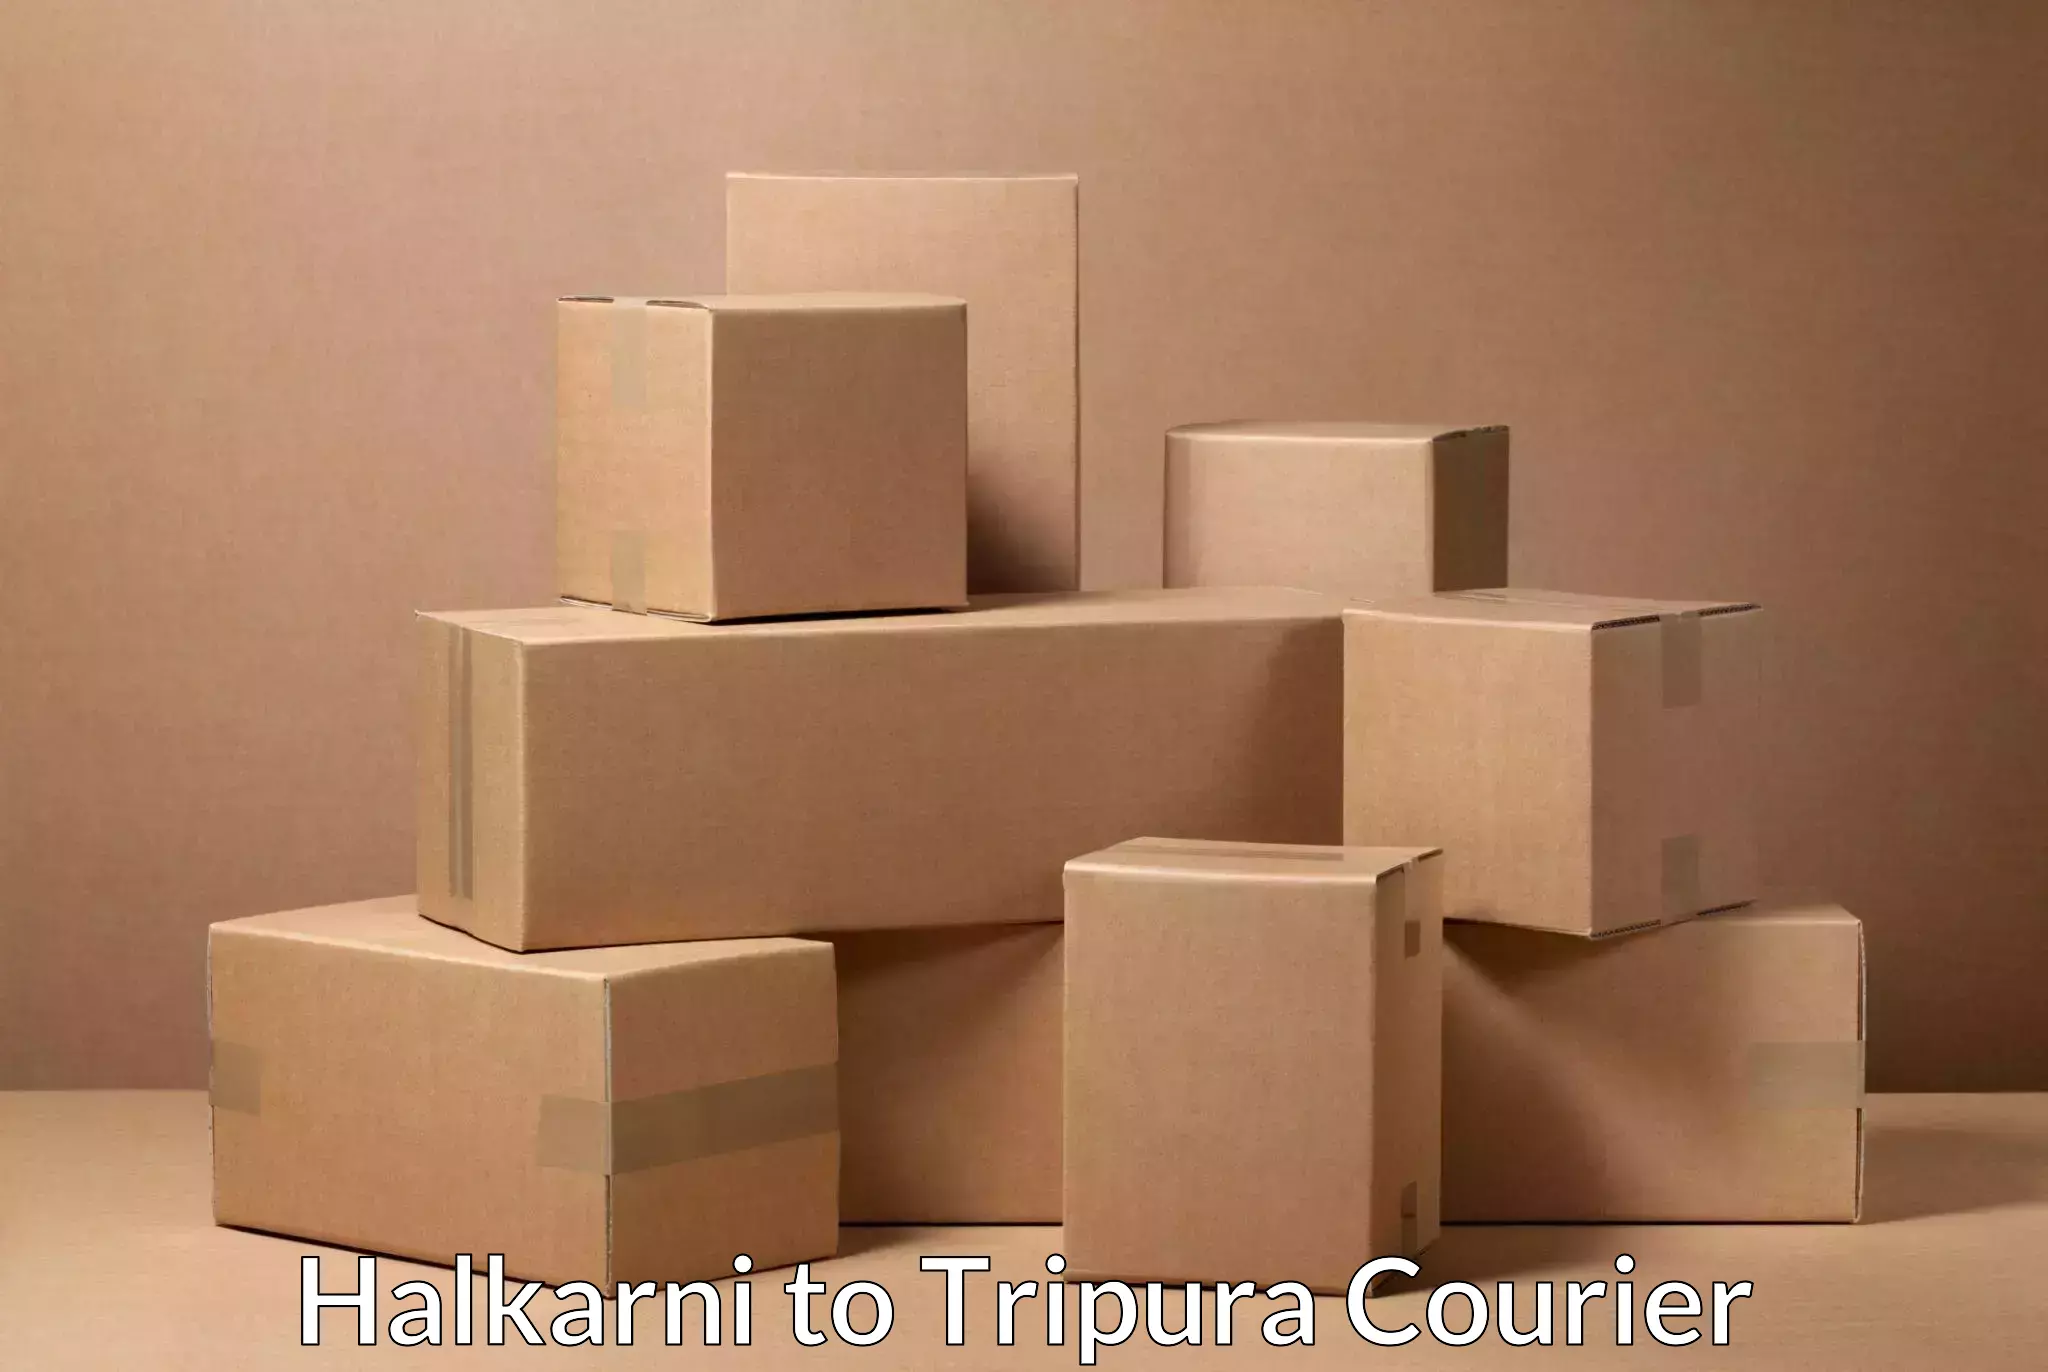 State-of-the-art courier technology Halkarni to Tripura